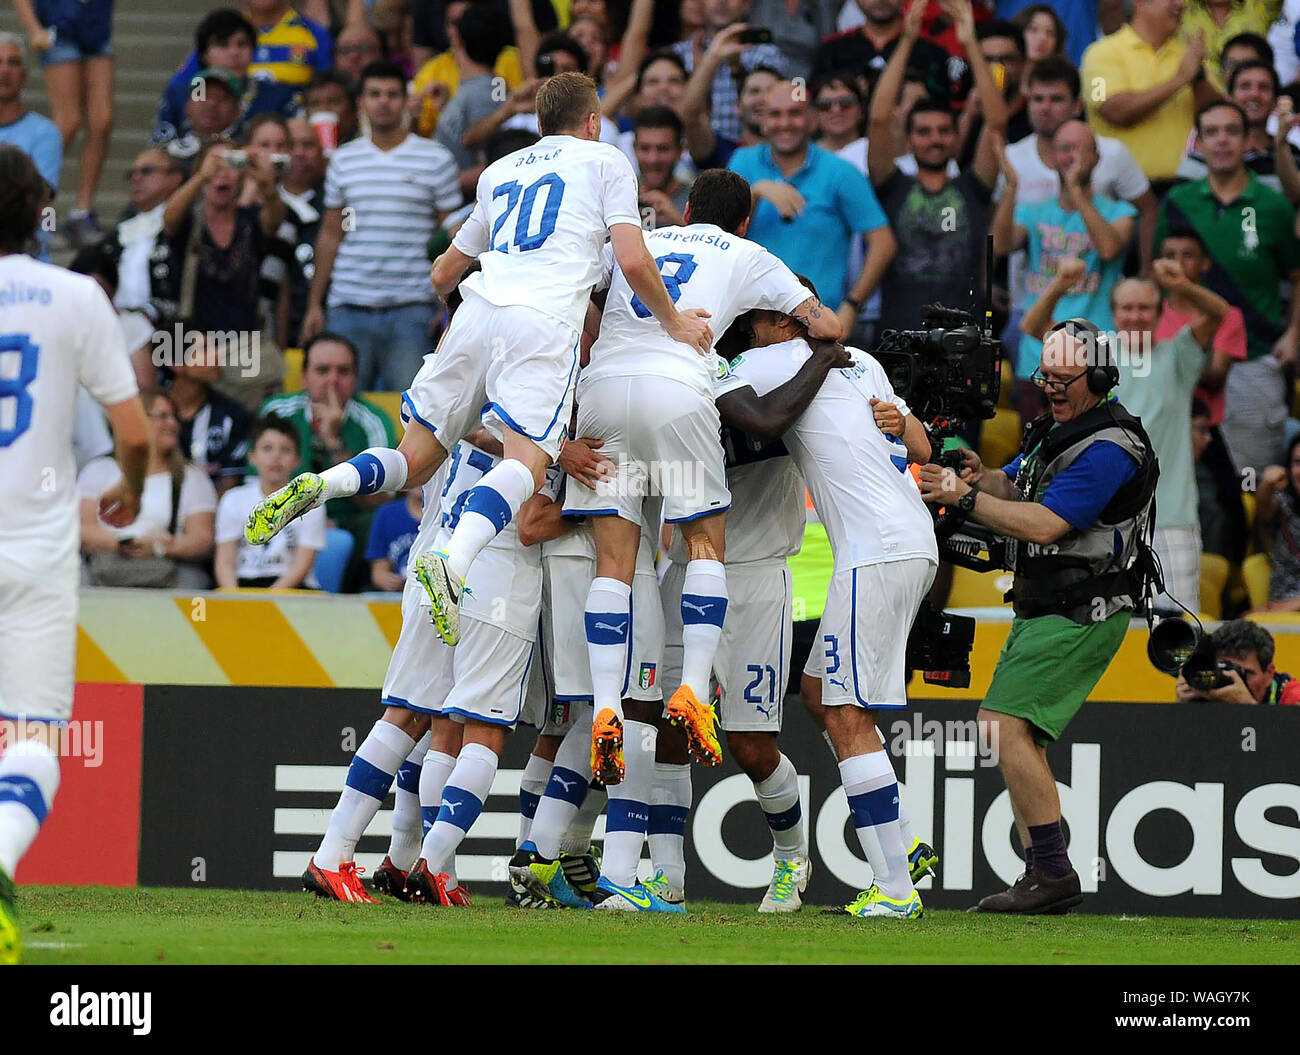 Rio de Janeiro, Brazil, June 16, 2013. Players of the Italy team celebrating goal during the match Mexico x Italy by the Confederations Cup in Maracan Stock Photo